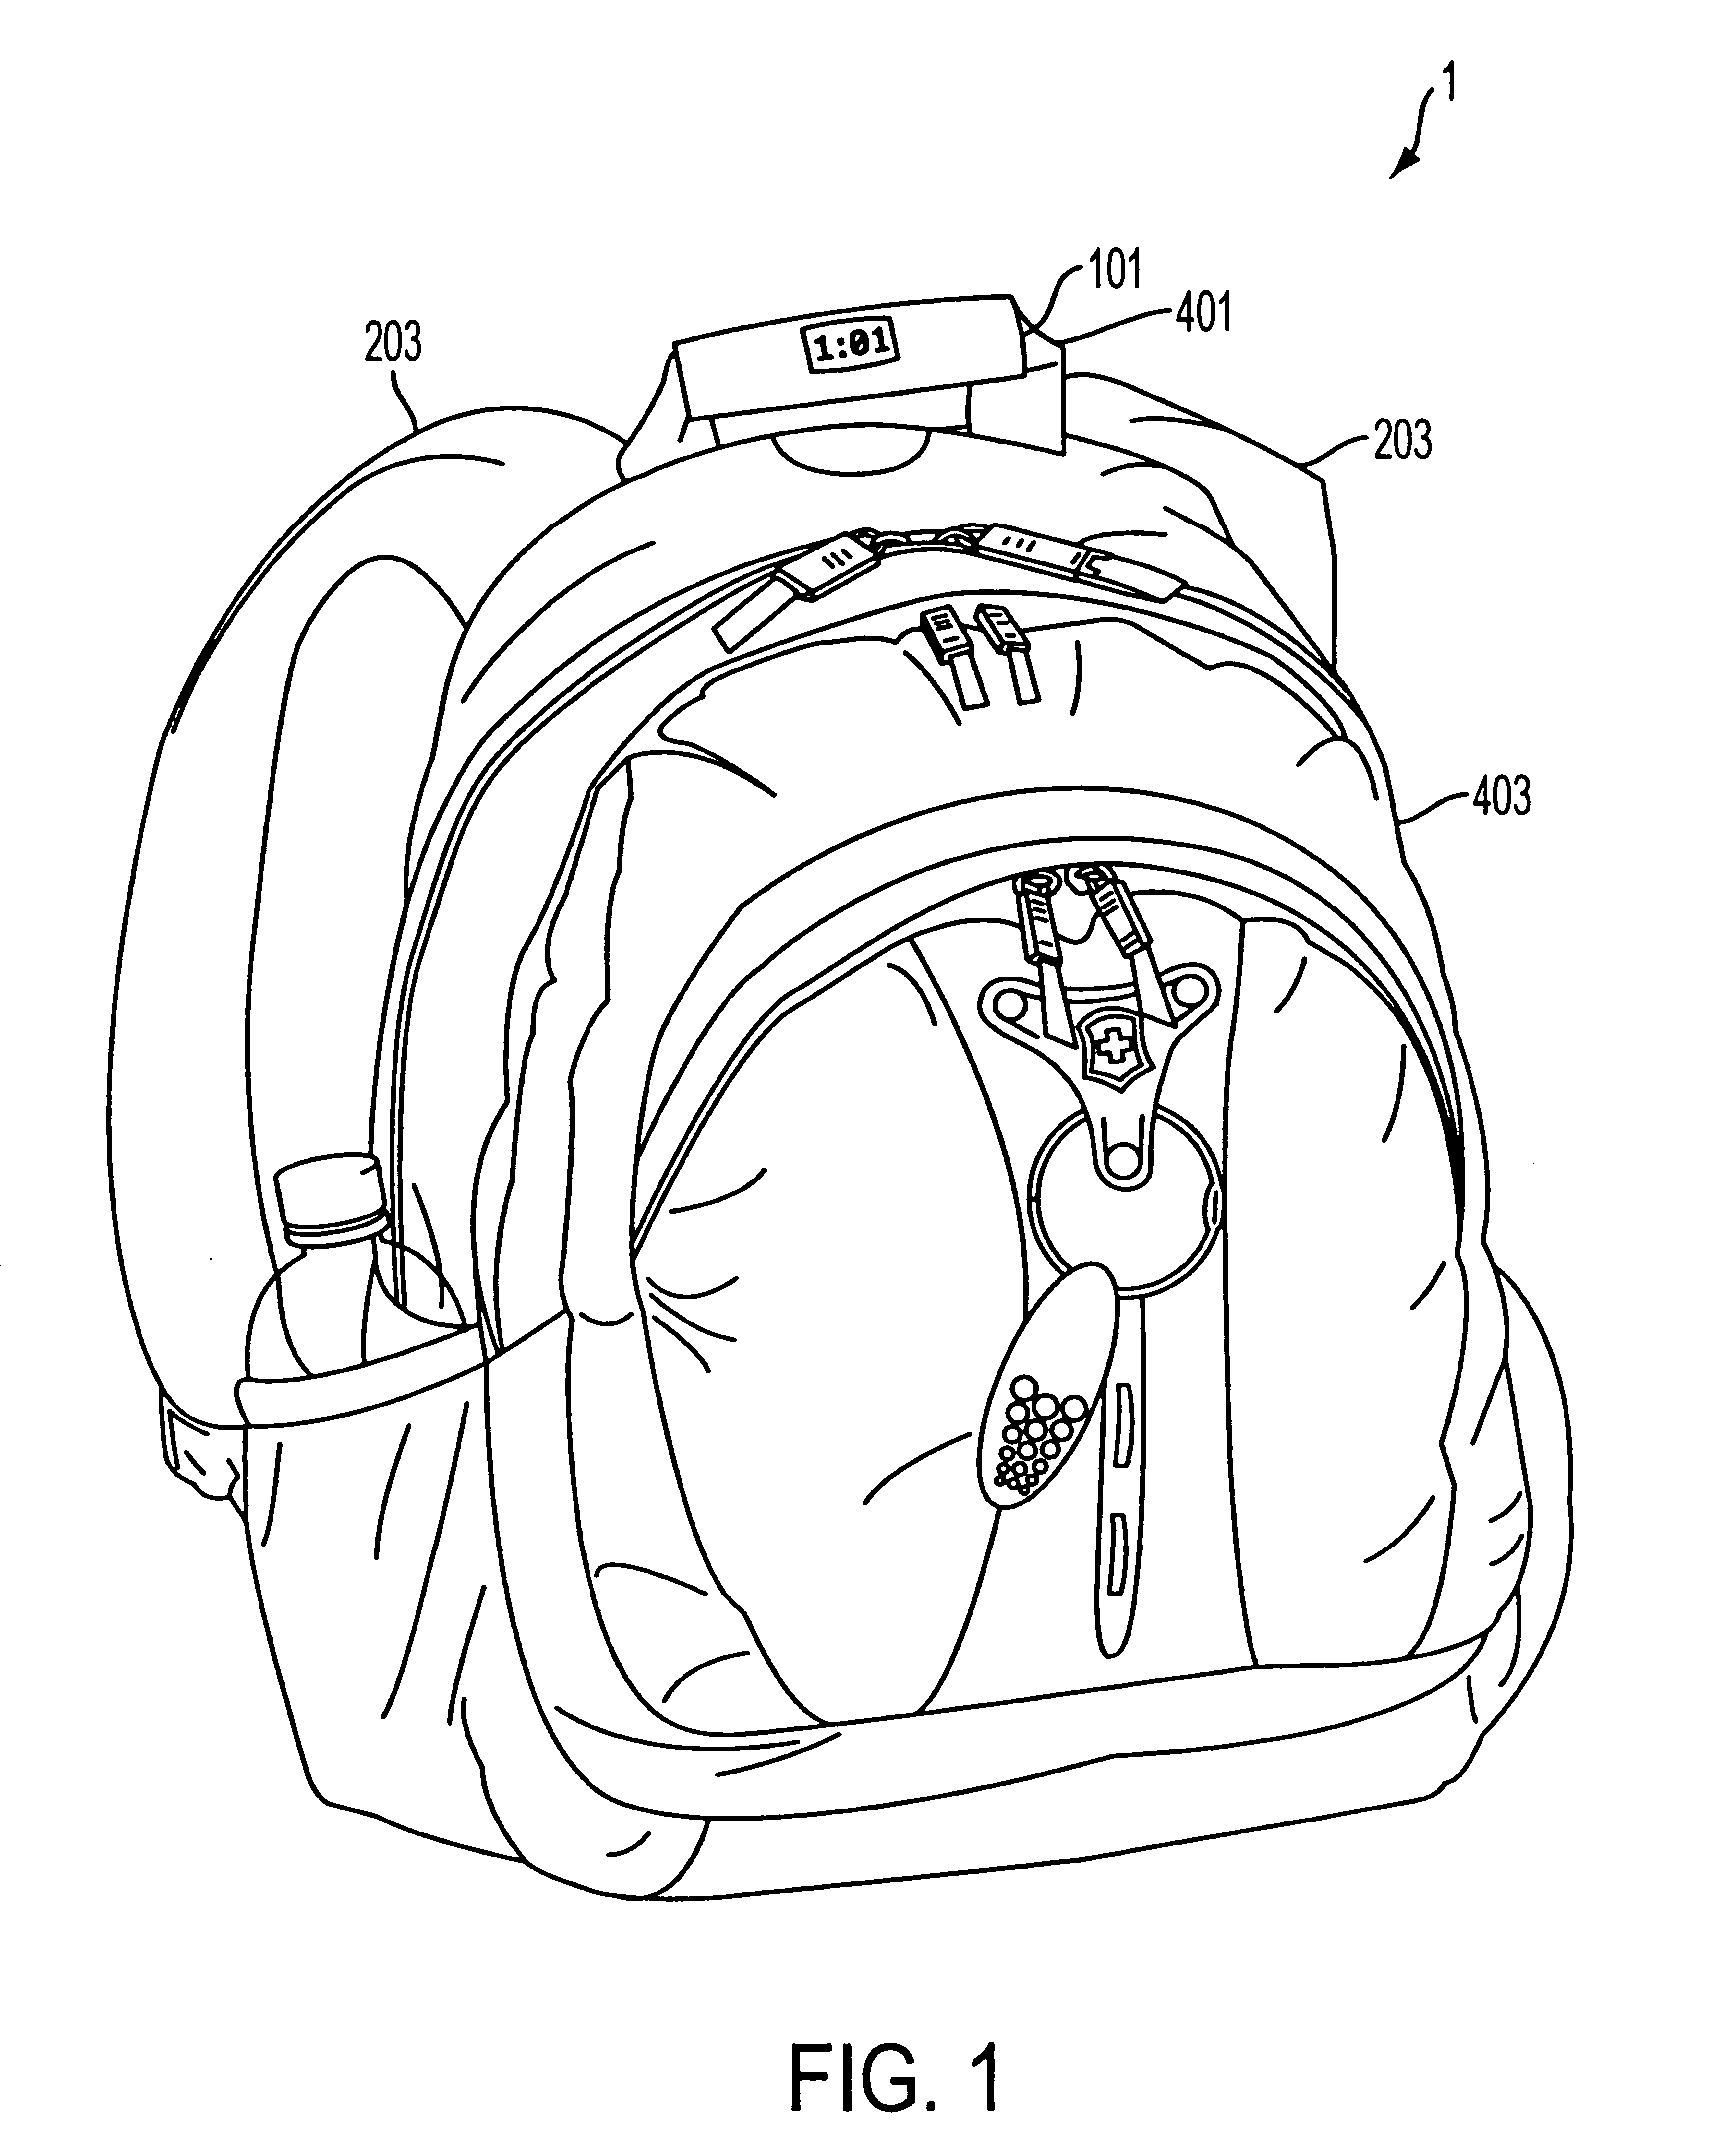 Weight determining mechanism for a backpack or other luggage